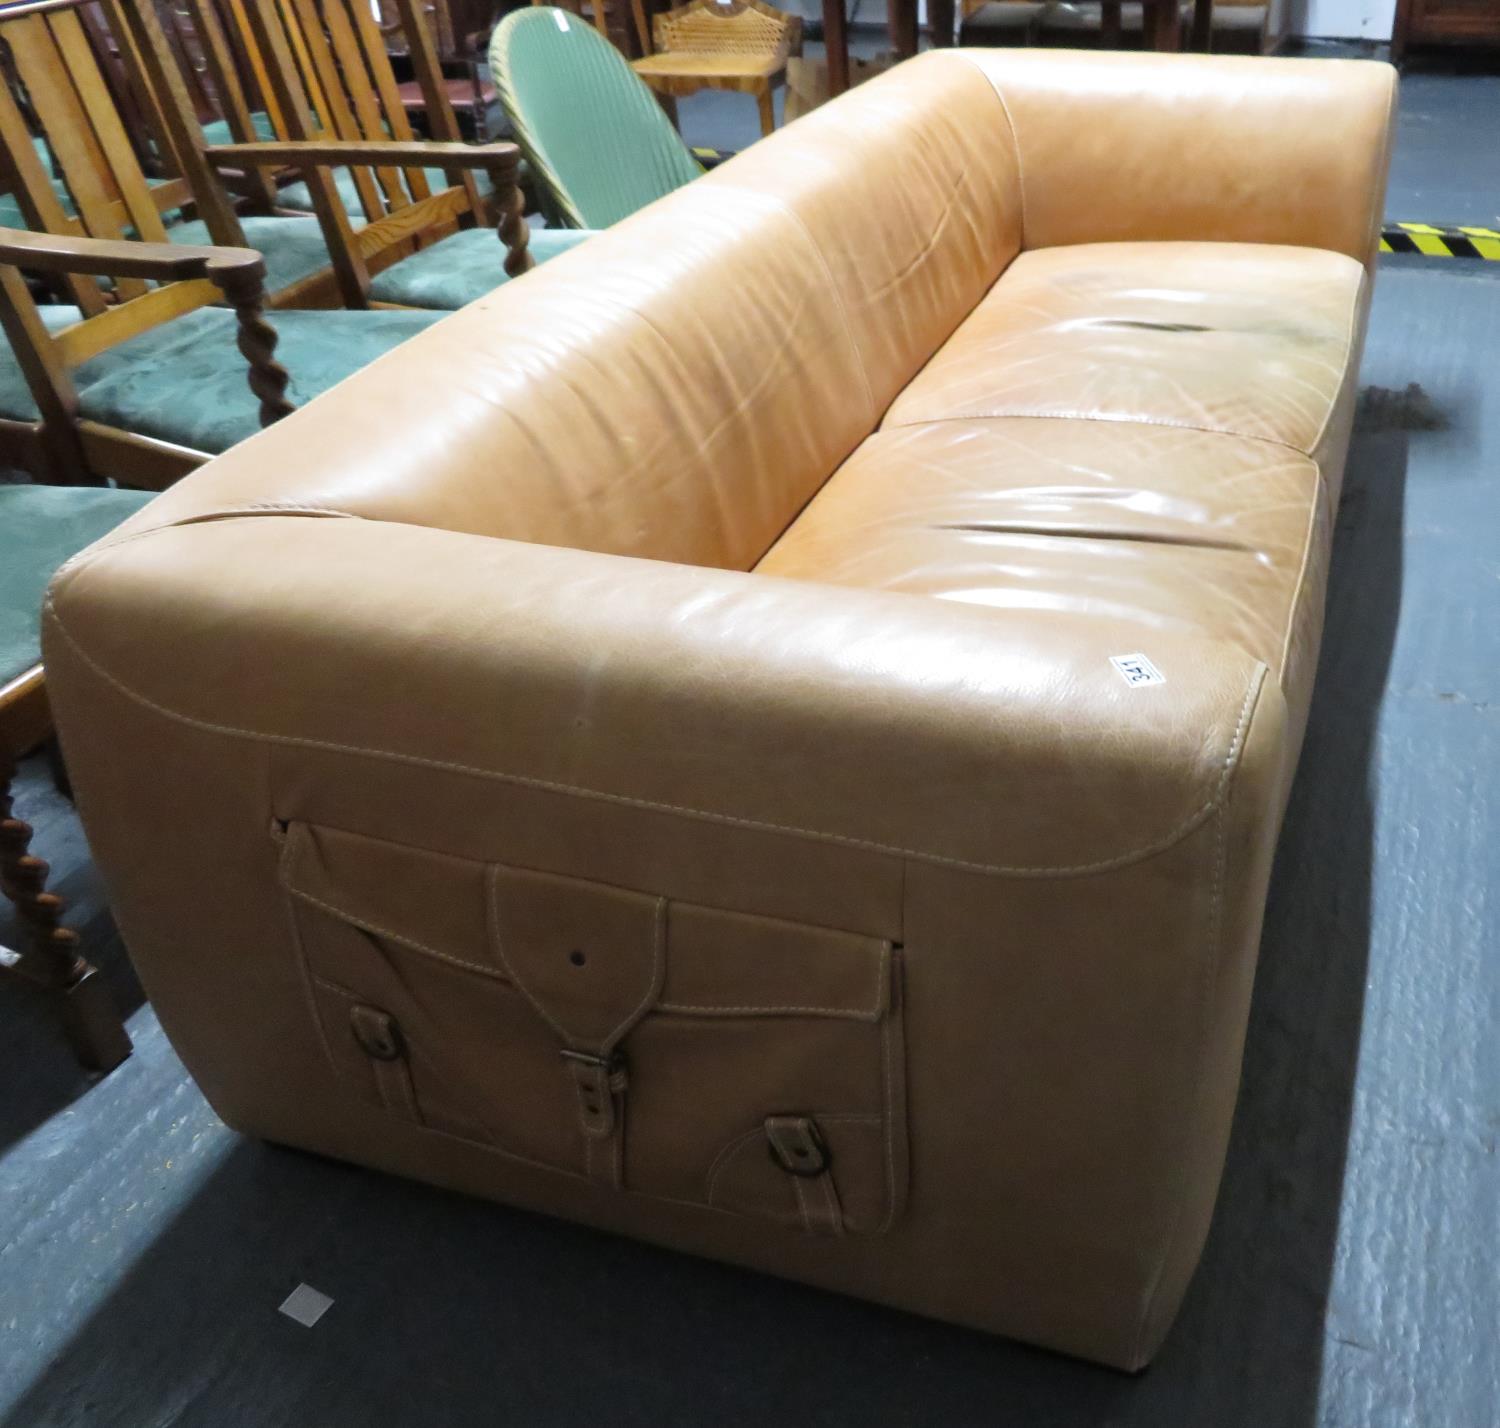 Light tan stressed leather four seater sofa with saddle bags each end - Italian made - Bild 2 aus 3